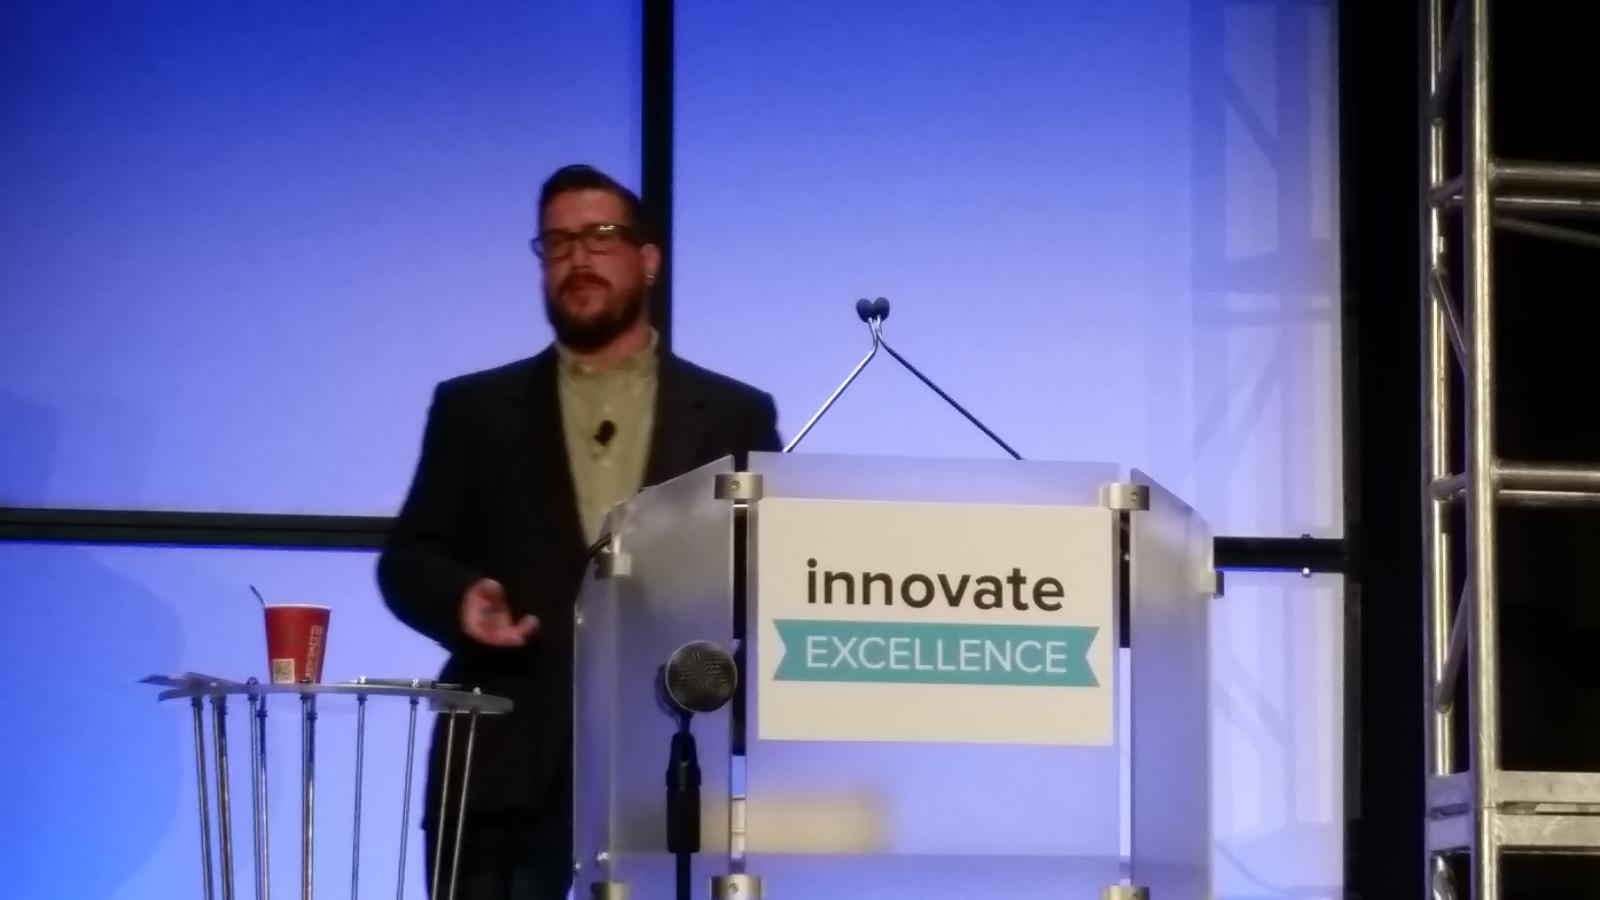 Gabe presenting at the Innovate Conference